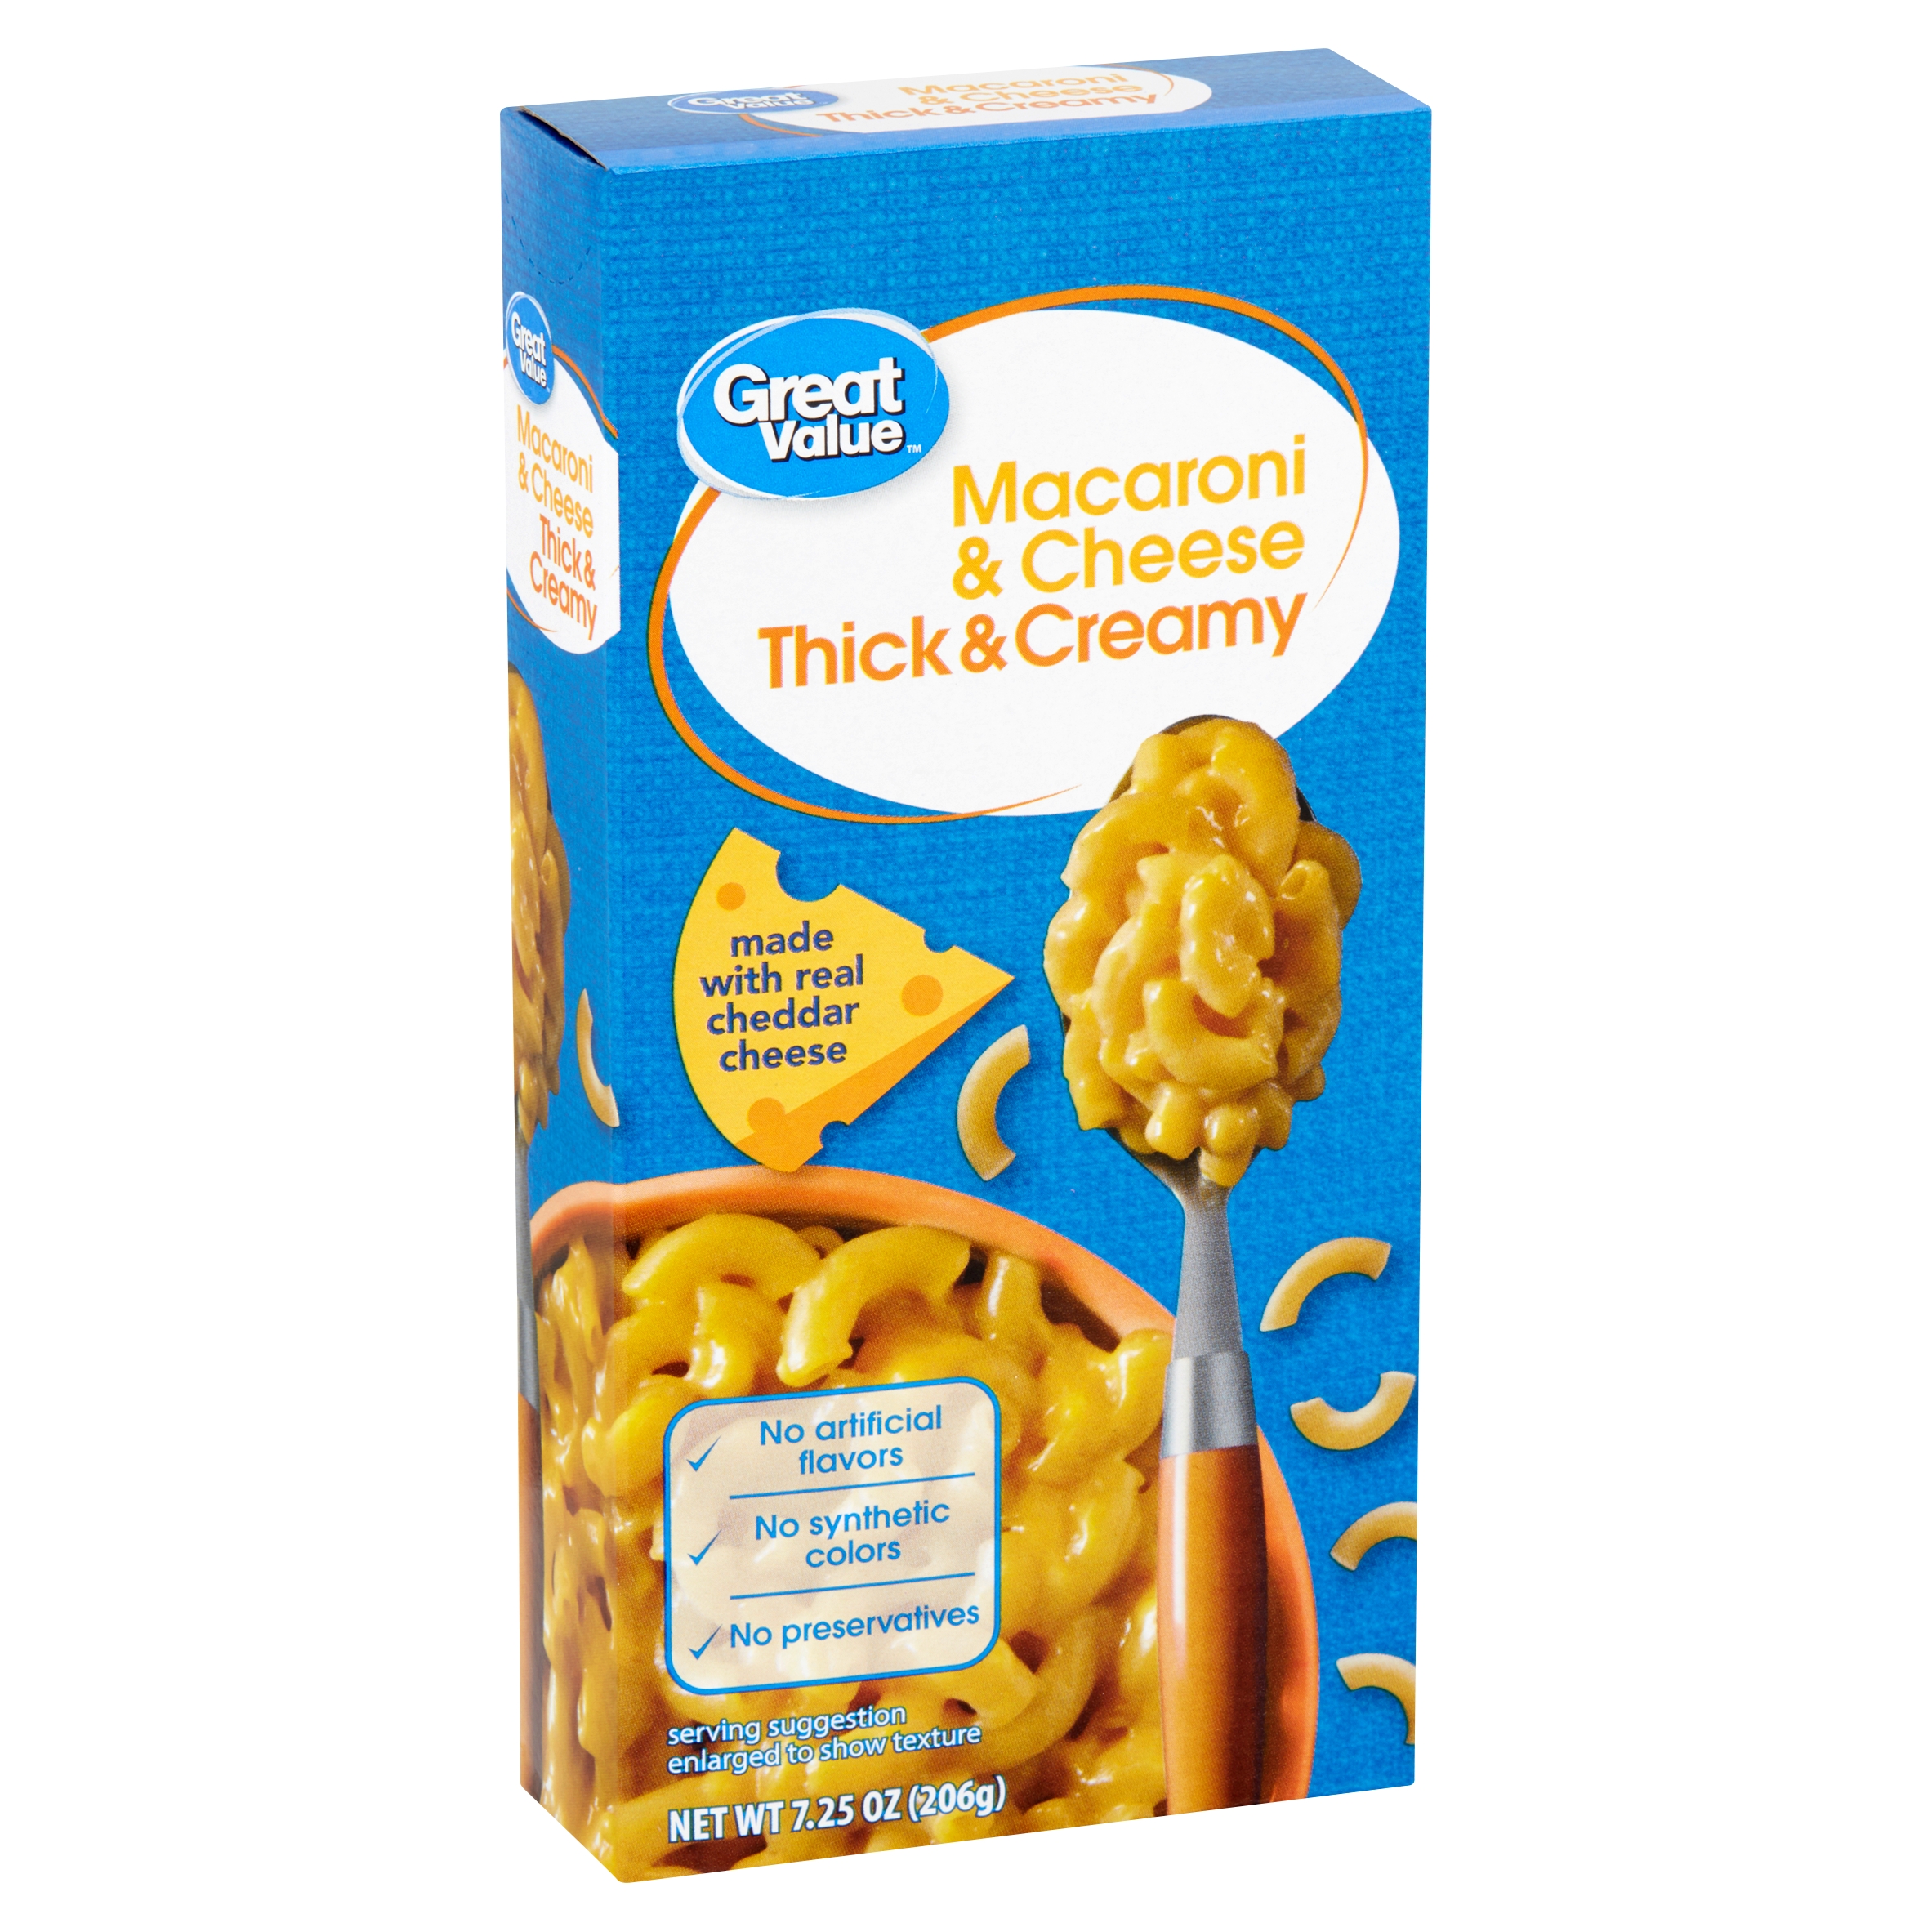 Great Value Thick & Creamy Macaroni & Cheese, 7.25 Oz Image